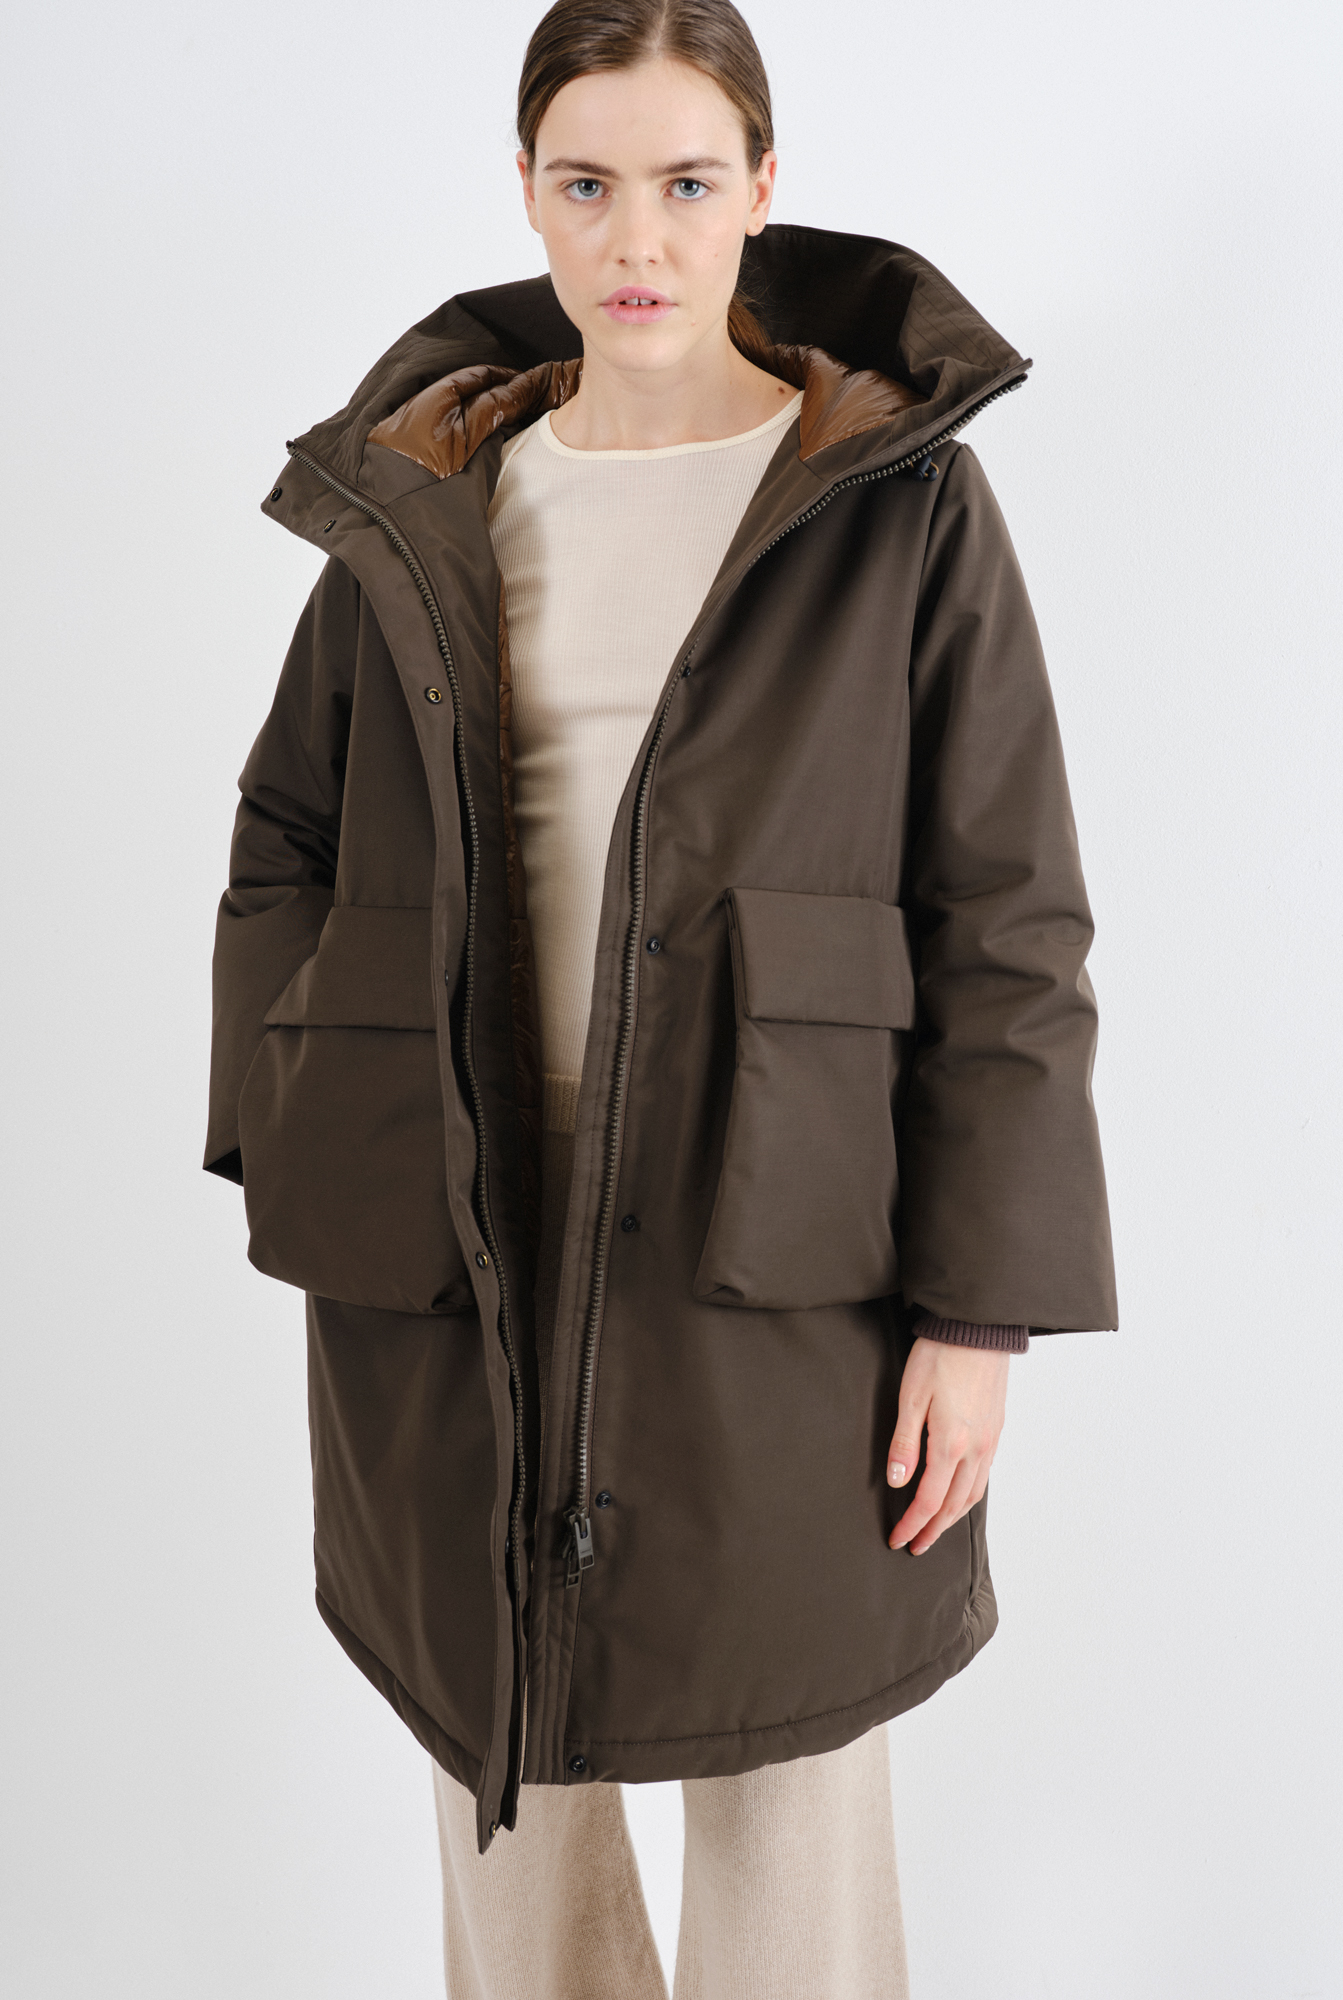 Embassy of Bricks and Logs OUTLET, MONTENEGRO UTILITY COAT im SALE